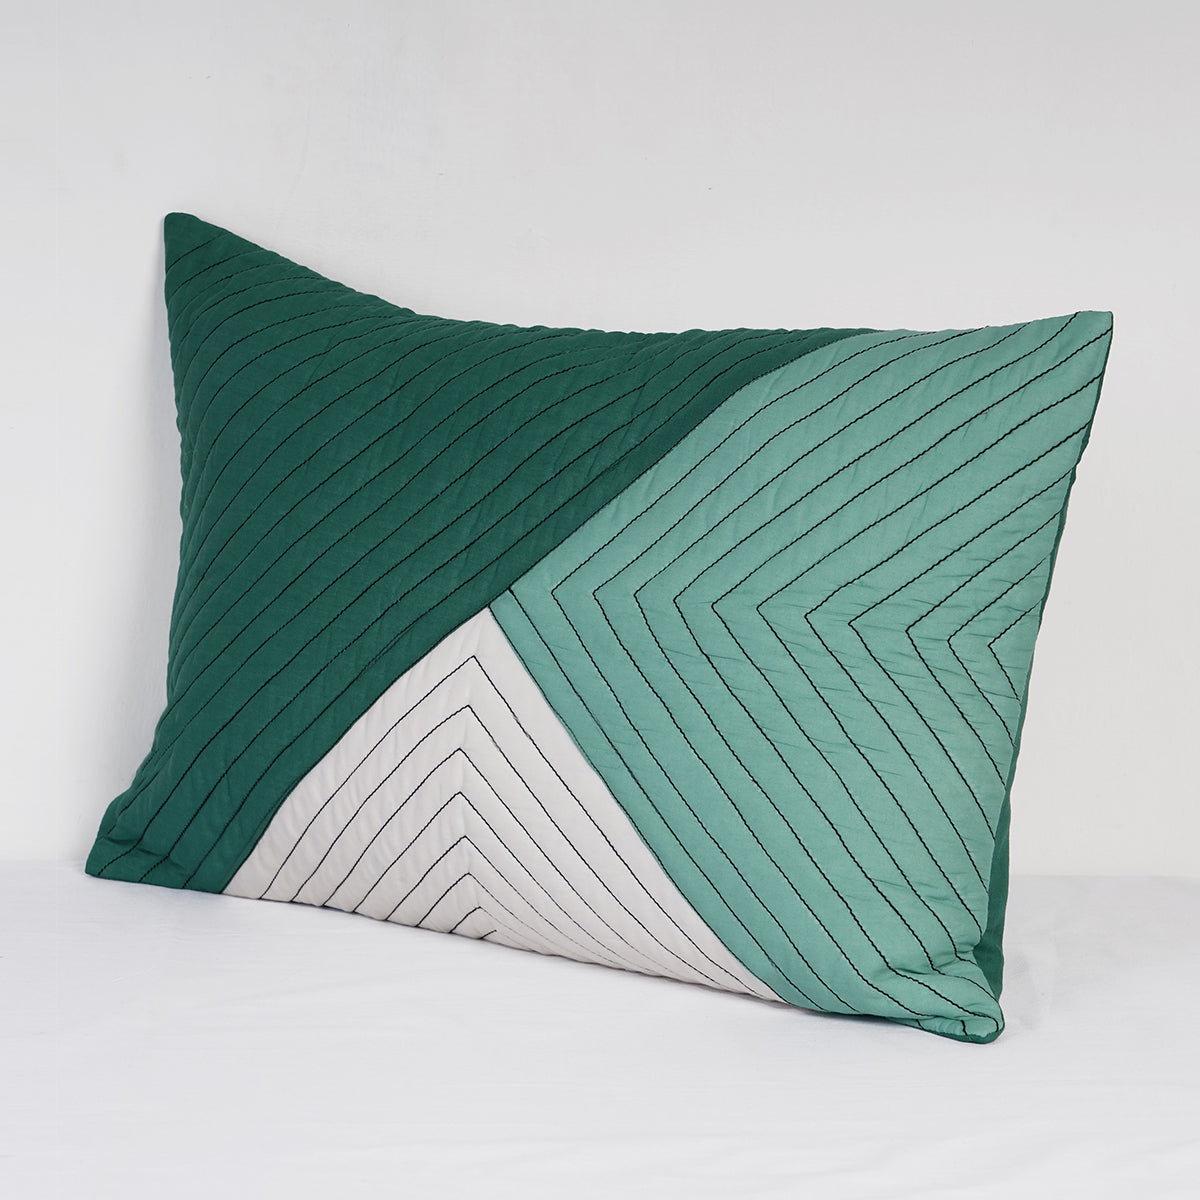 MODERN RETRO - Aqua Green patchwork and quilted pillow cover, colour block cushion cover, sizes available